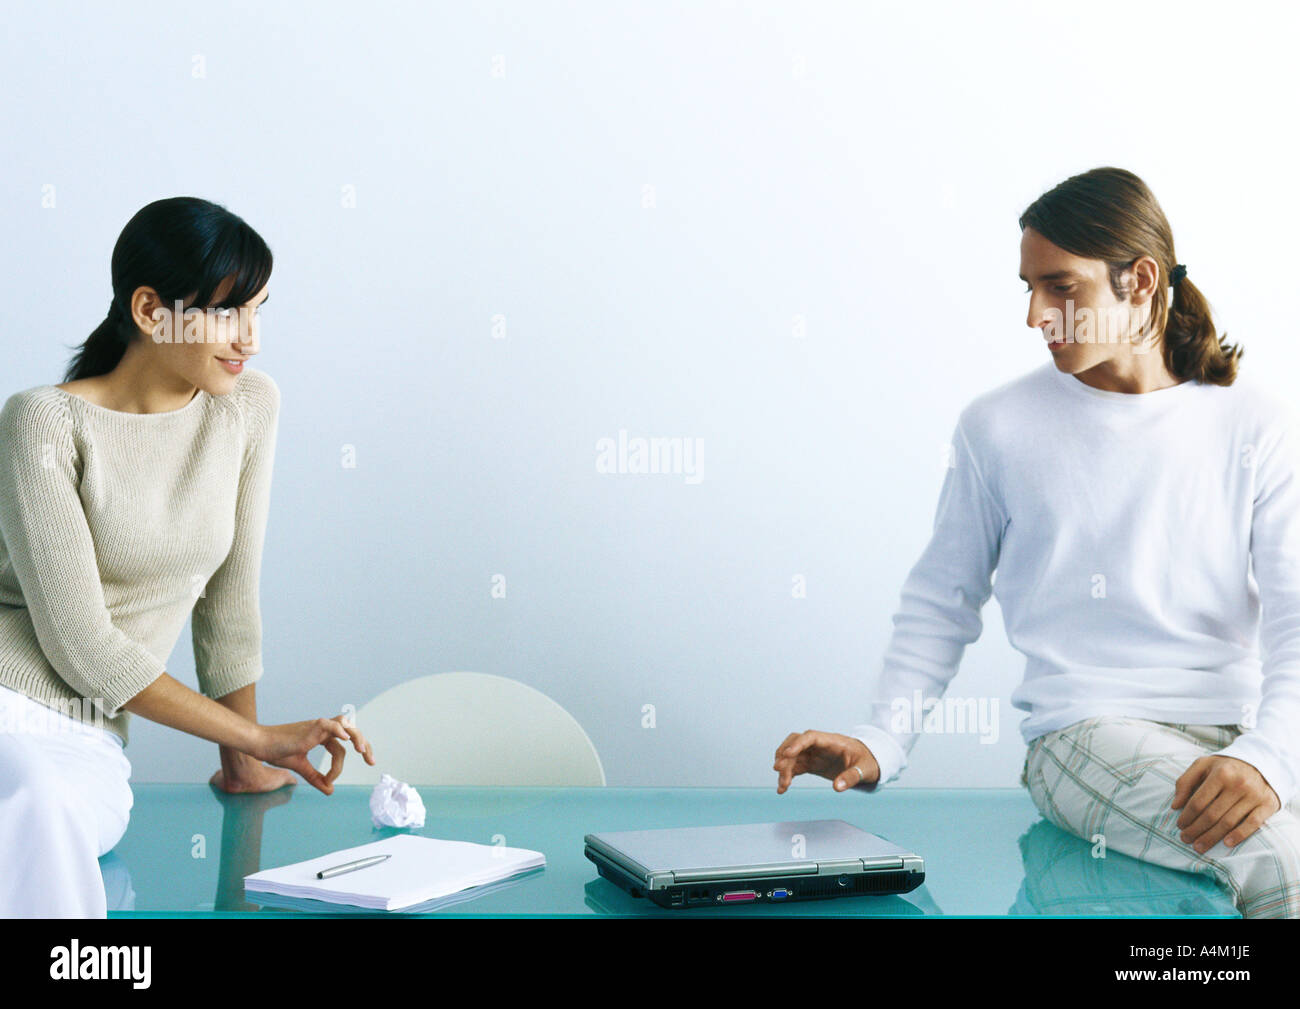 Man and woman sitting on table, woman flicking paper ball to man Stock Photo